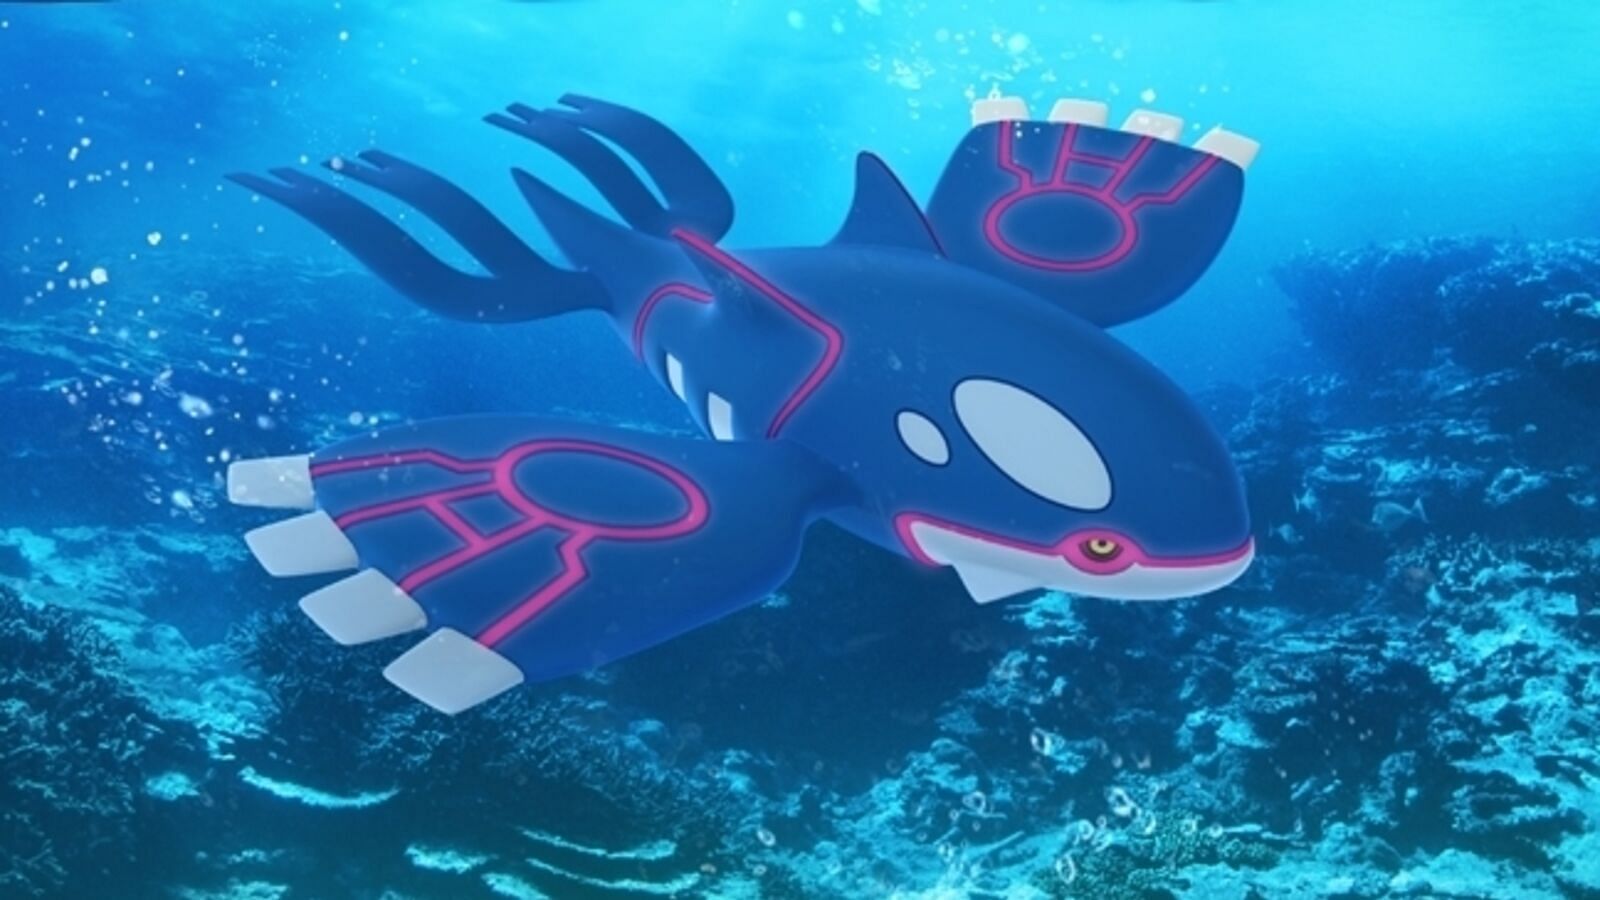 Kyogre as it appears in promotional imagery for Pokemon GO (Image via Niantic)